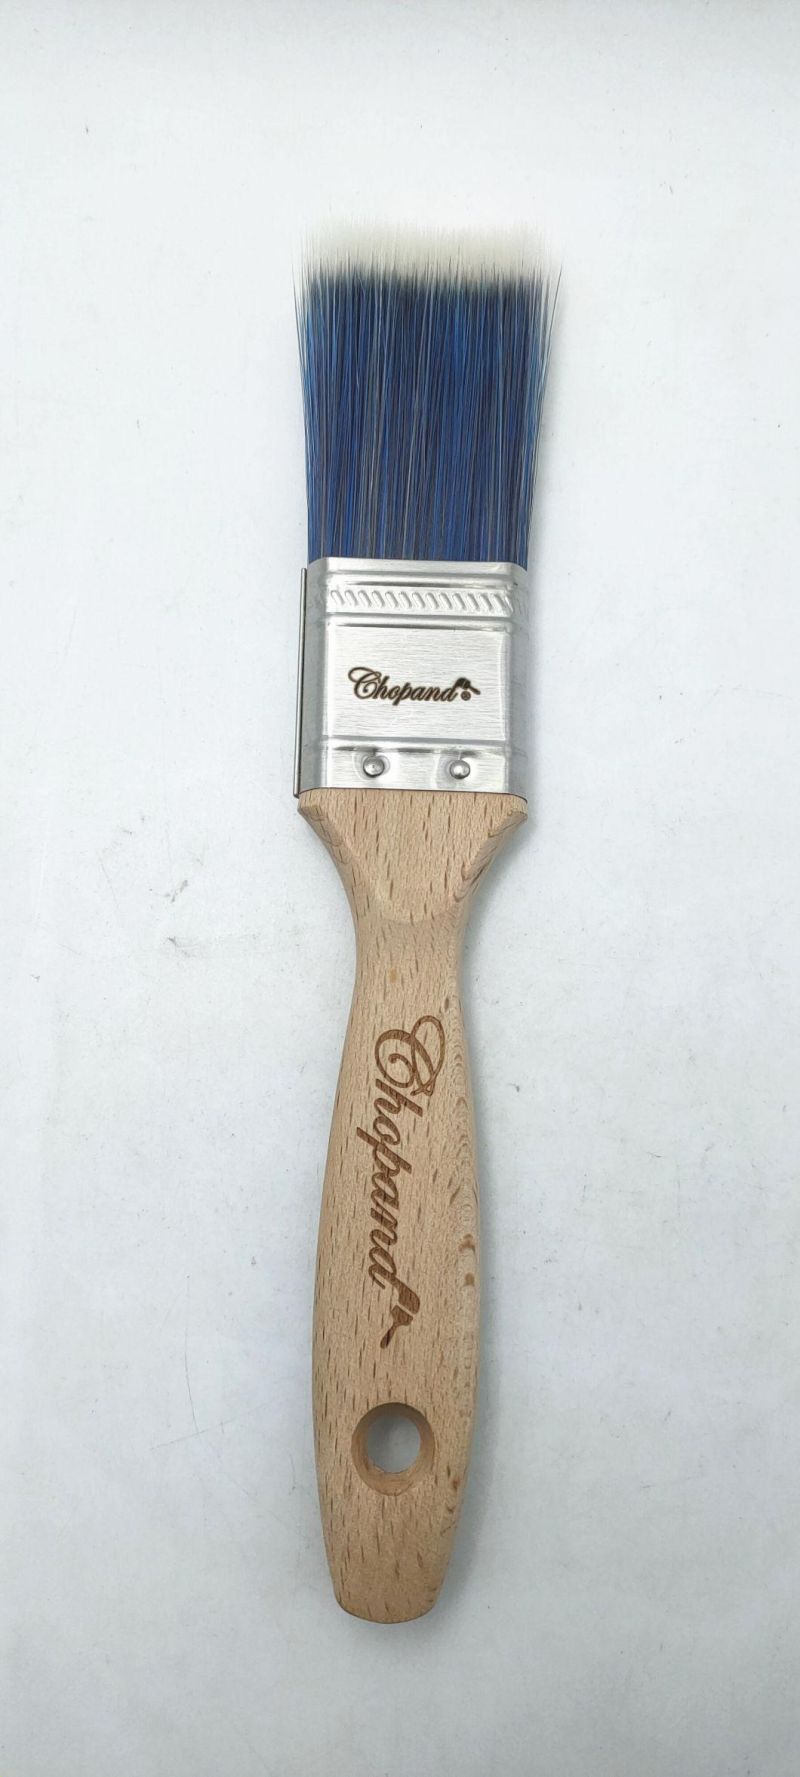 Chopand Good Quality Personalised Purdy Paint Tools Wholesale Personalised 2inch Paint Brushes